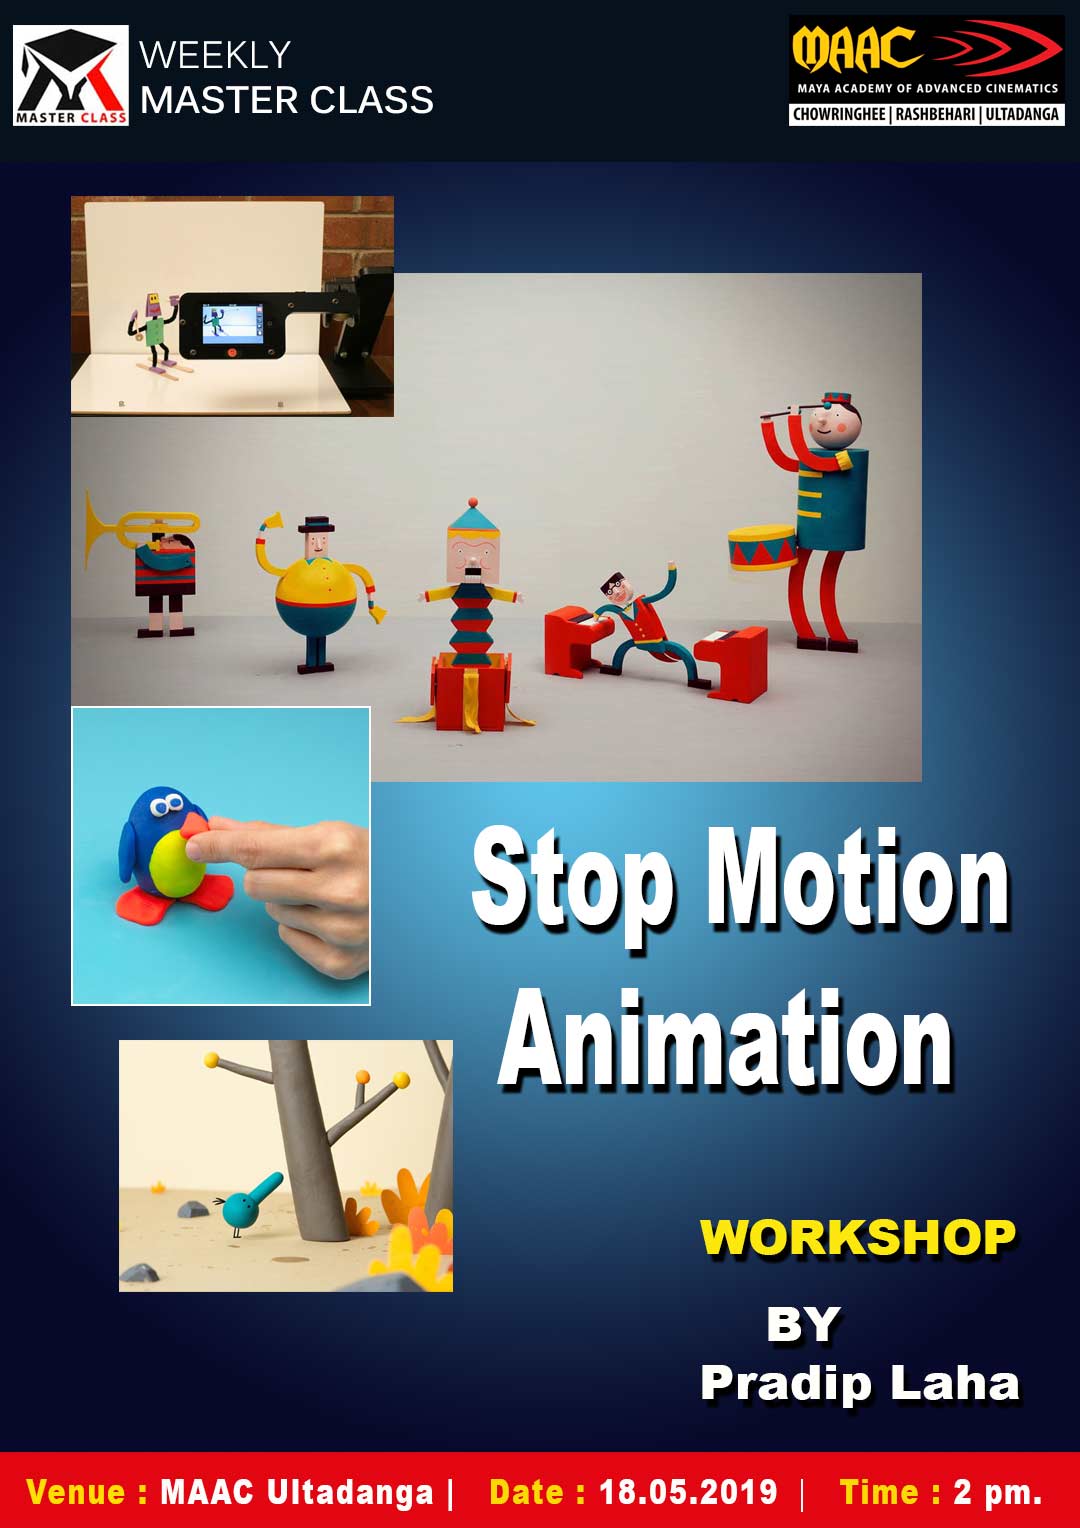 Weekly Master Class on Stop Motion Animation